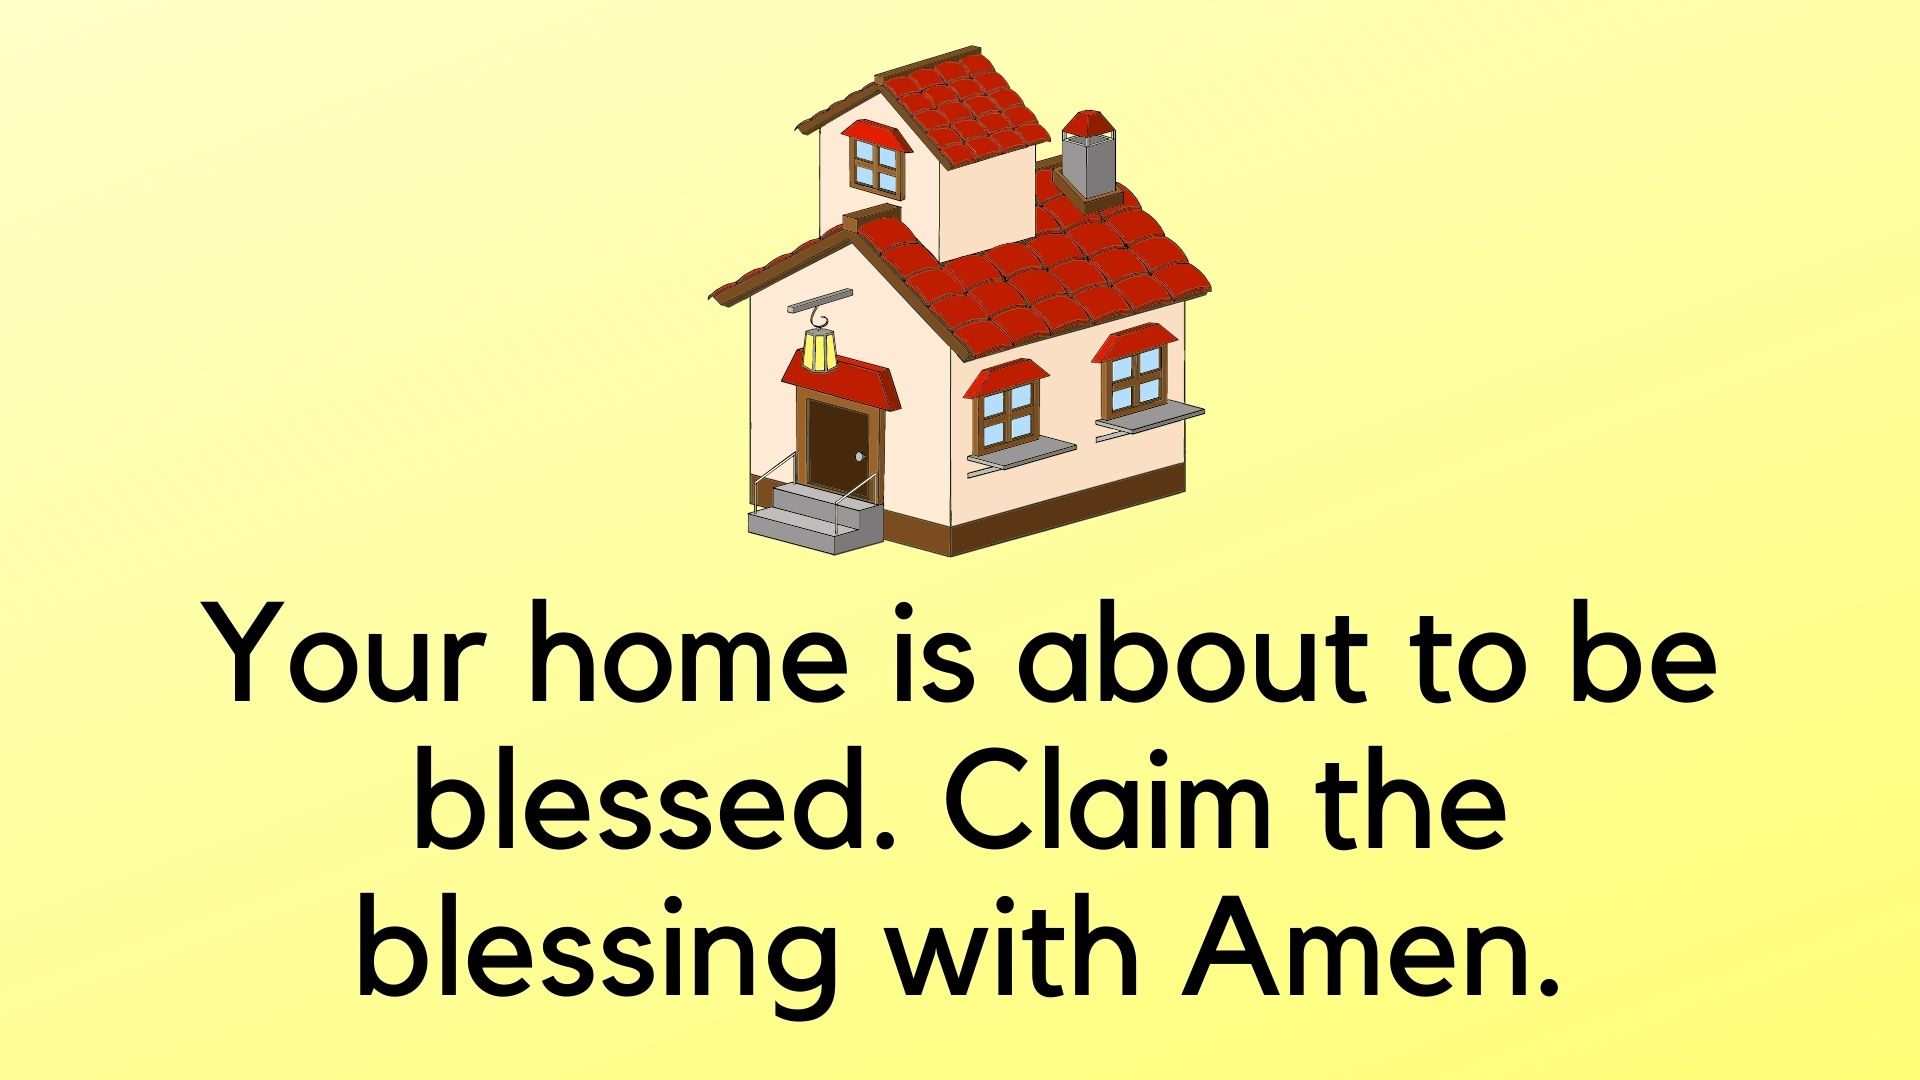 Claim The Blessing With Amen